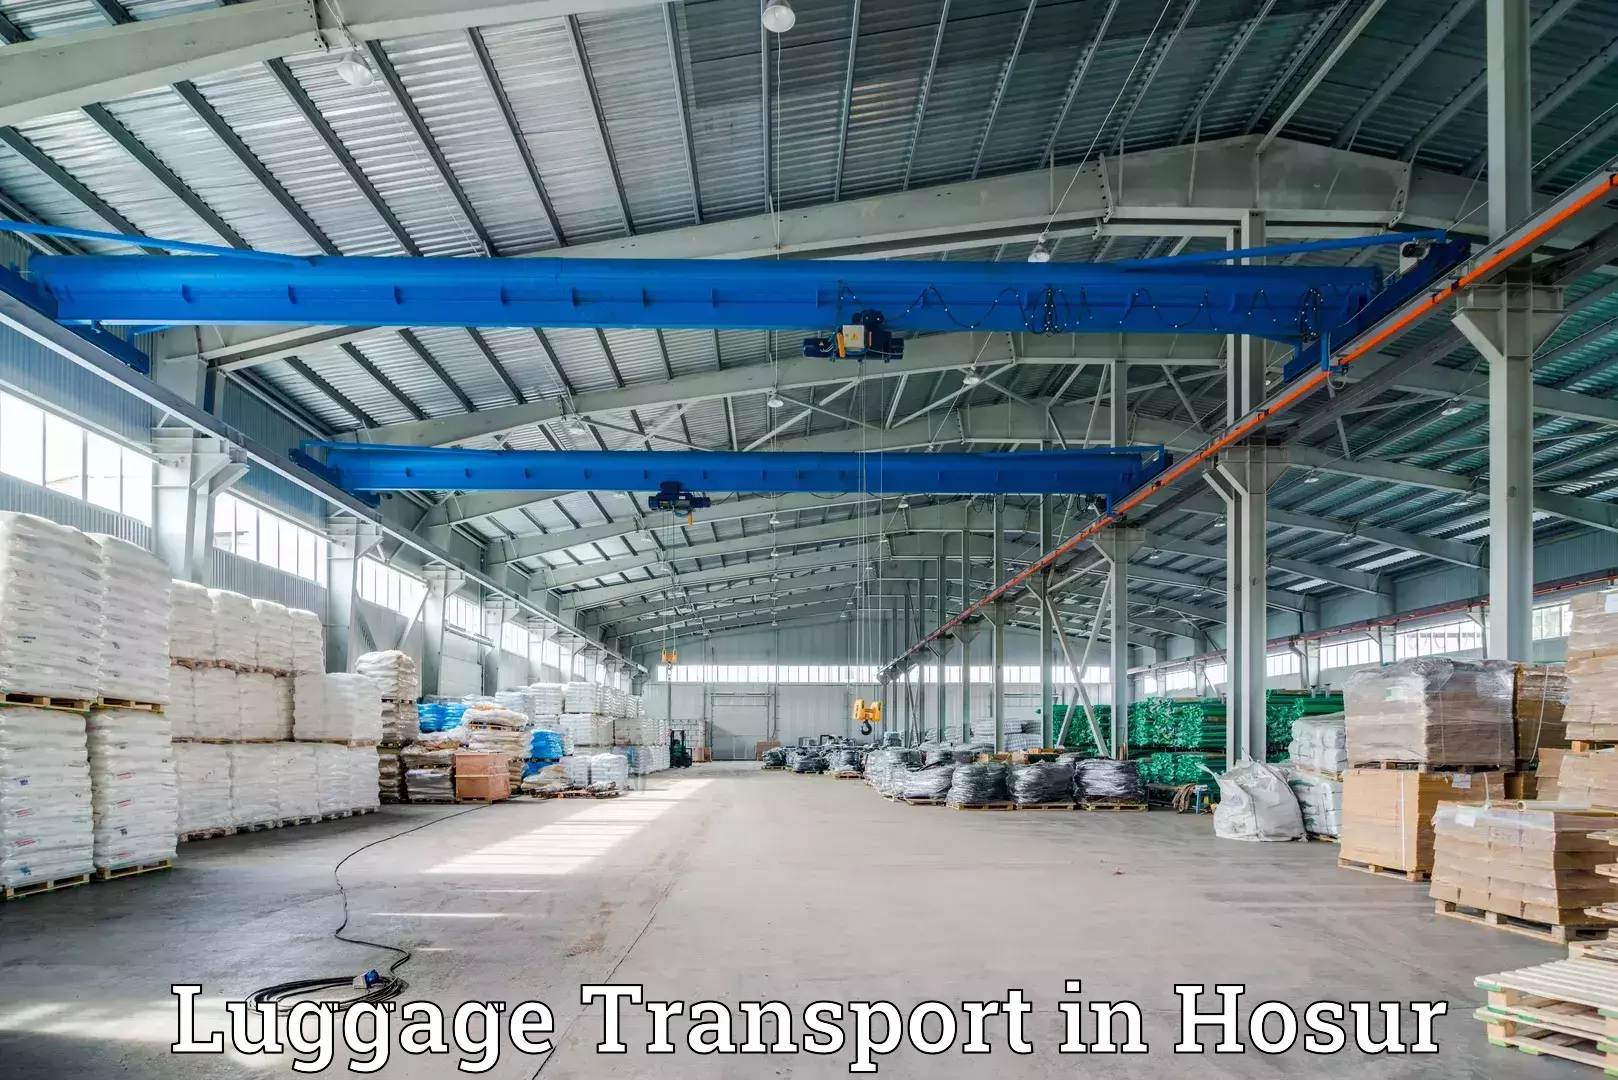 Luggage transport operations in Hosur